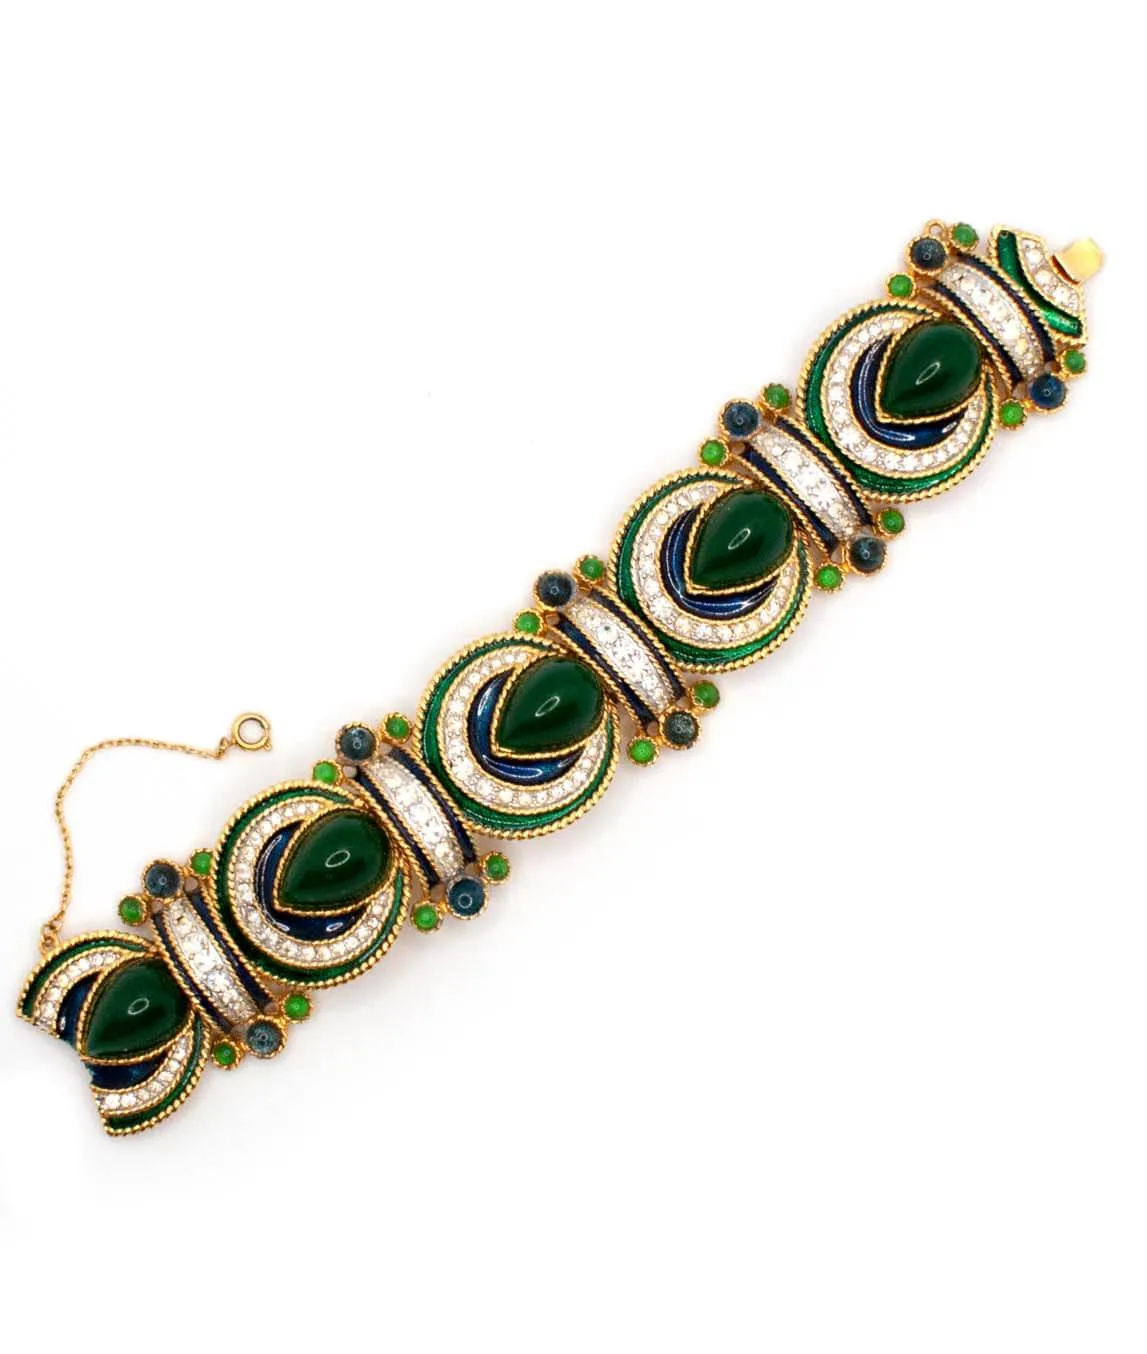 Glass crystal and enamel bracelet by D'Orlan